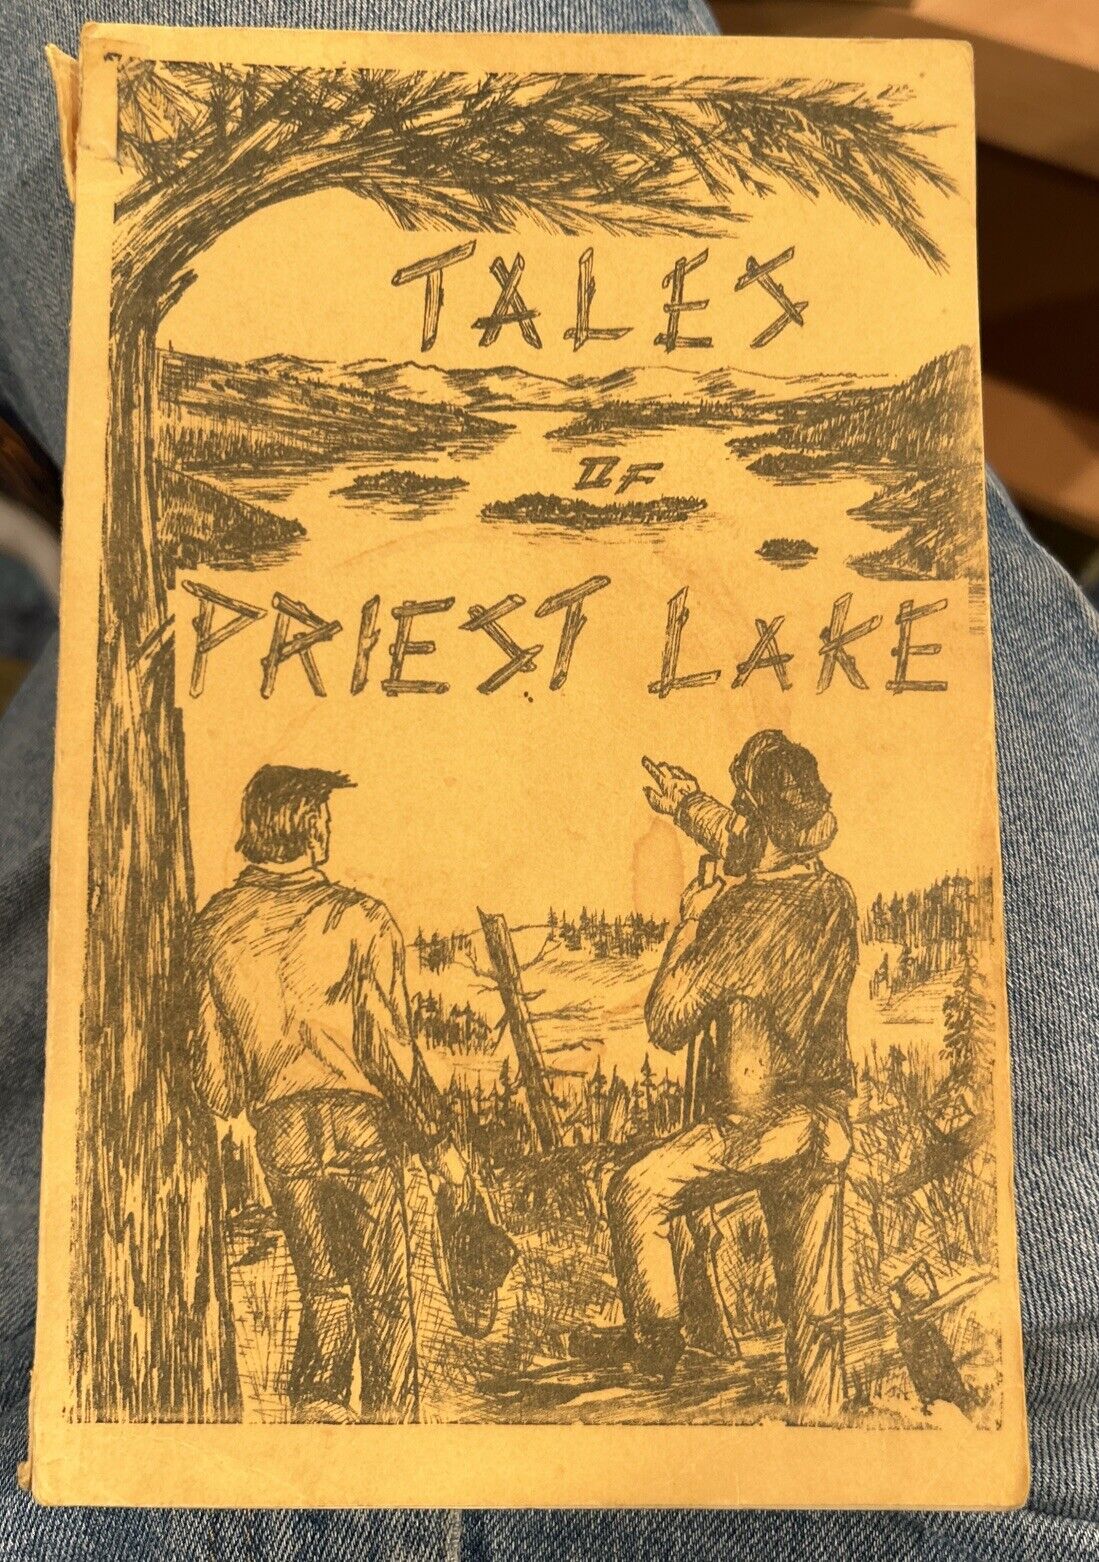 Tales of Priest Lake by Rev James Estes * 1964 * Scarce Papercover Idaho History